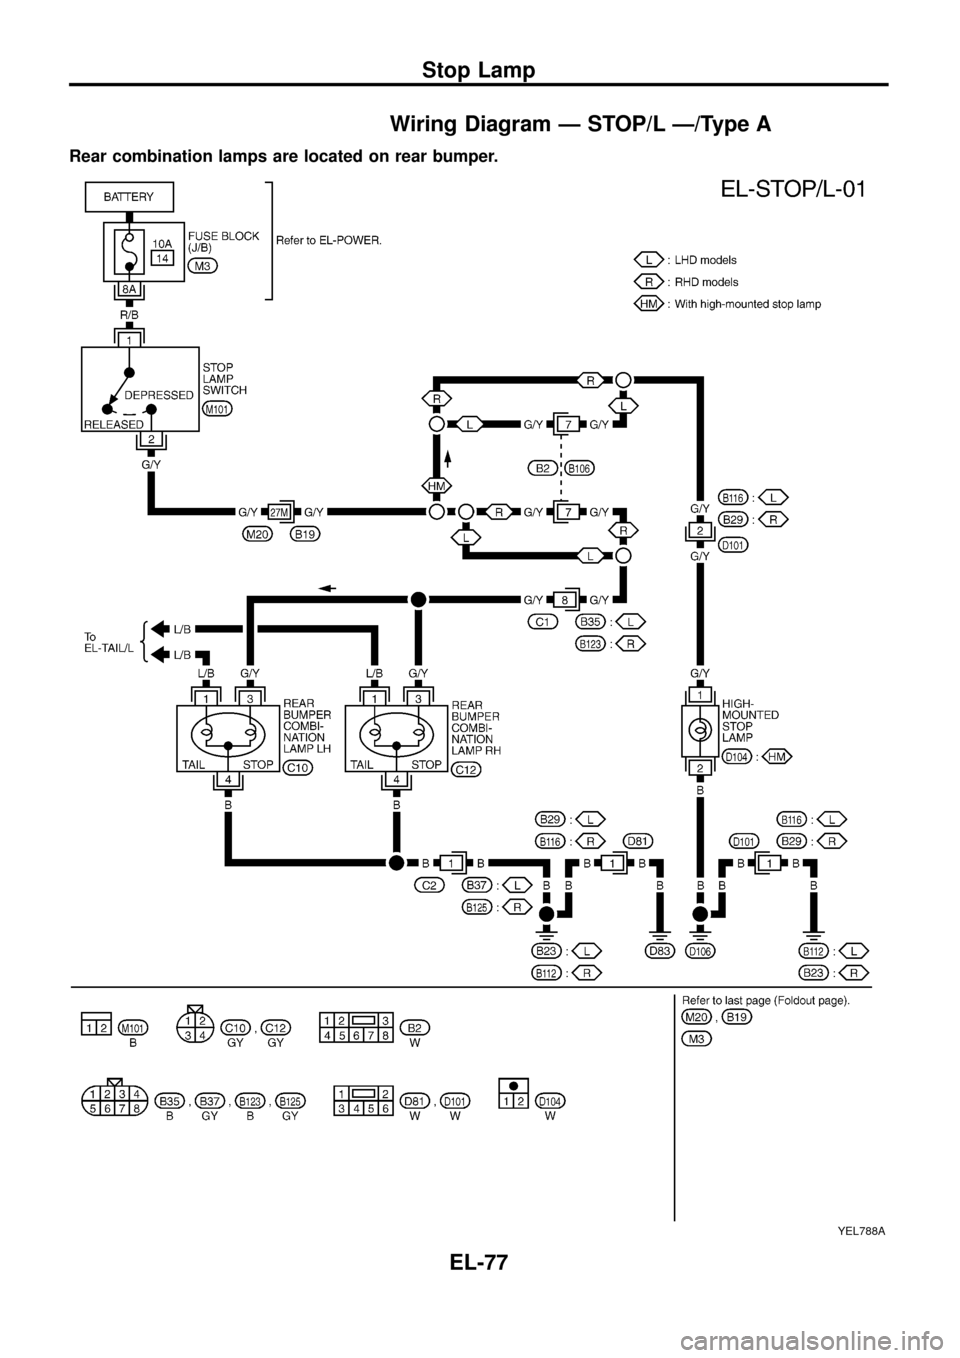 NISSAN PATROL 1998 Y61 / 5.G Electrical System User Guide Wiring Diagram Ð STOP/L Ð/Type A
Rear combination lamps are located on rear bumper.
YEL788A
Stop Lamp
EL-77 